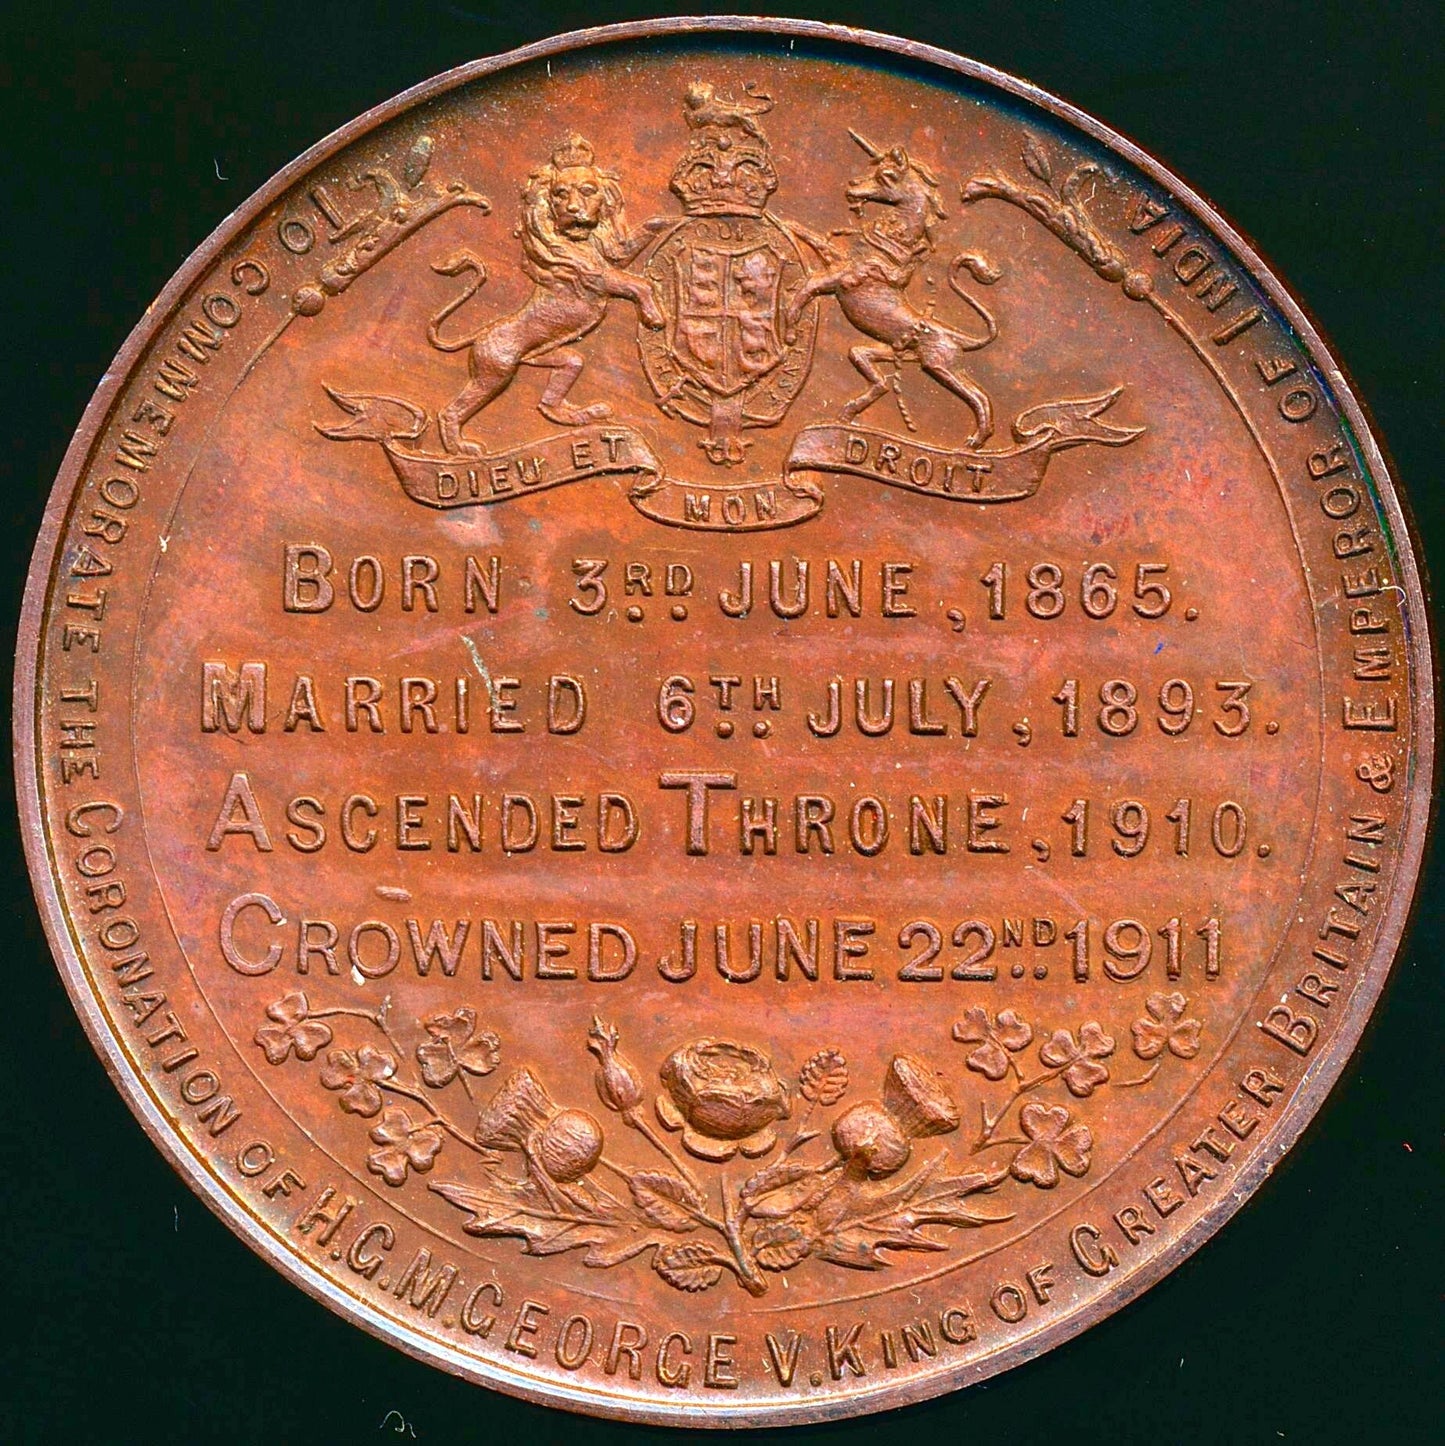 1911 Coronation bronze medal in box of issue BHM 4034var AUNC